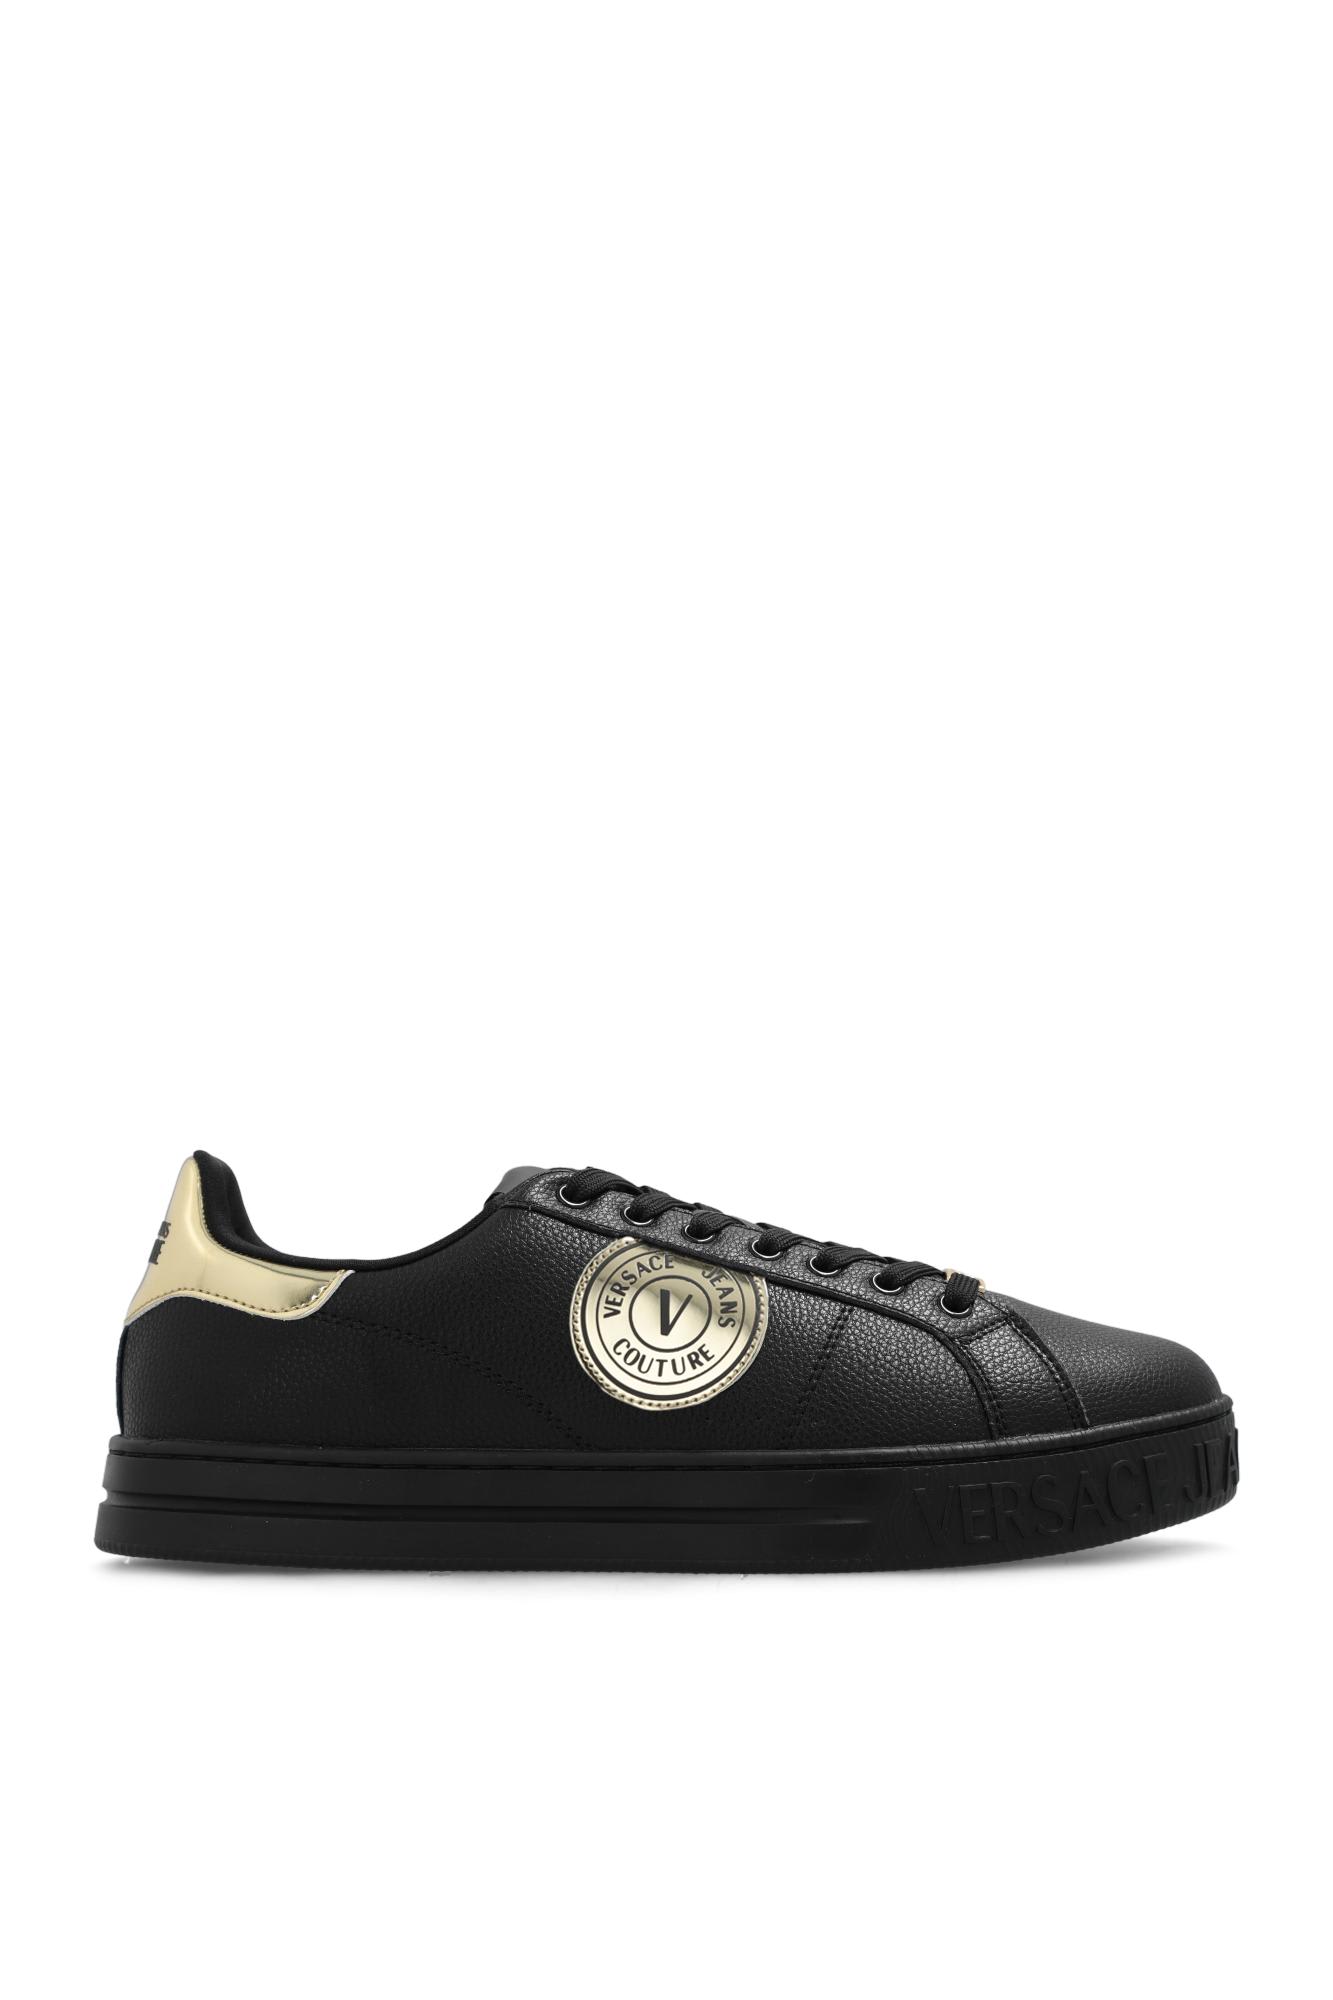 VERSACE JEANS COUTURE VERSACE JEANS COUTURE SNEAKERS WITH LOGO VERSACE JEANS COUTURE